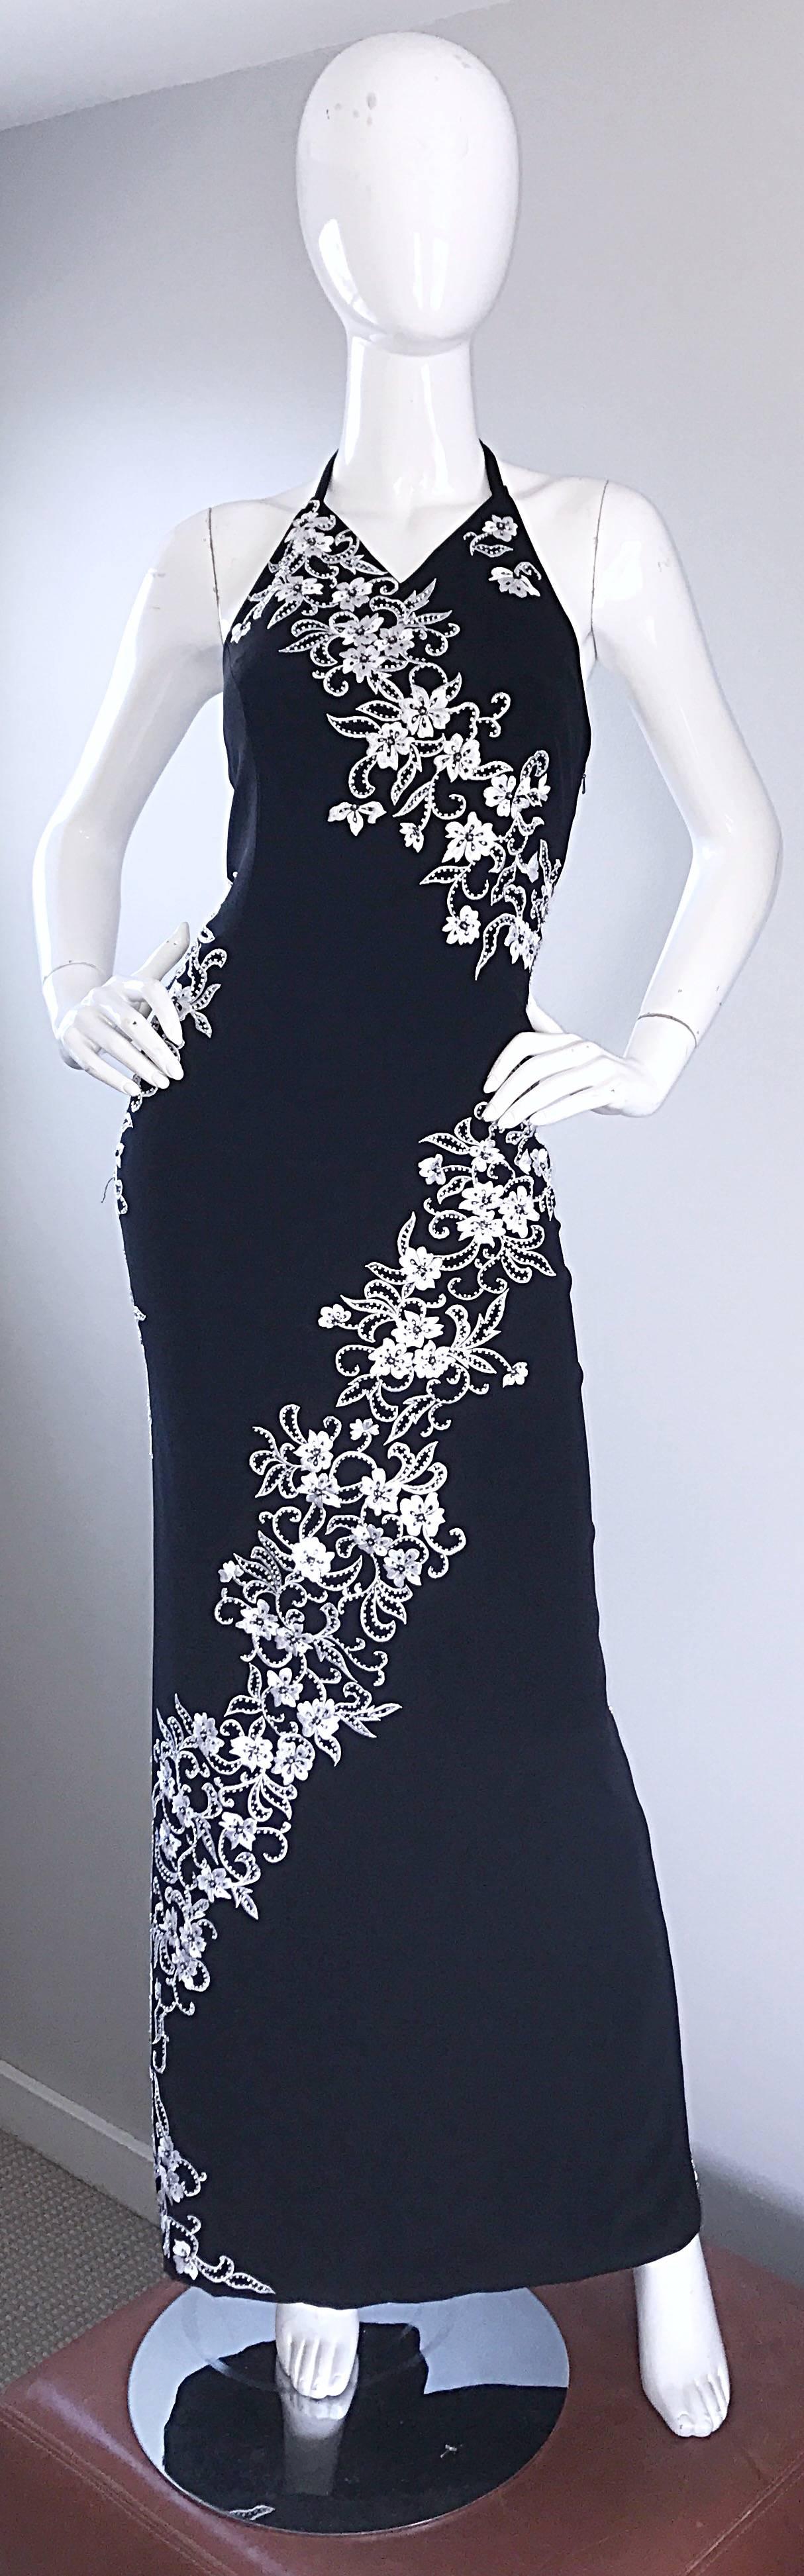 Gorgeous vintage BOB MACKIE Asian inspired black and white beaded floral evening dress! Features a flattering crepe rayon fabric, with thousands of hand-sewn beads throughout. High neck, with an Avant Garde column back. Hidden zipper up the side